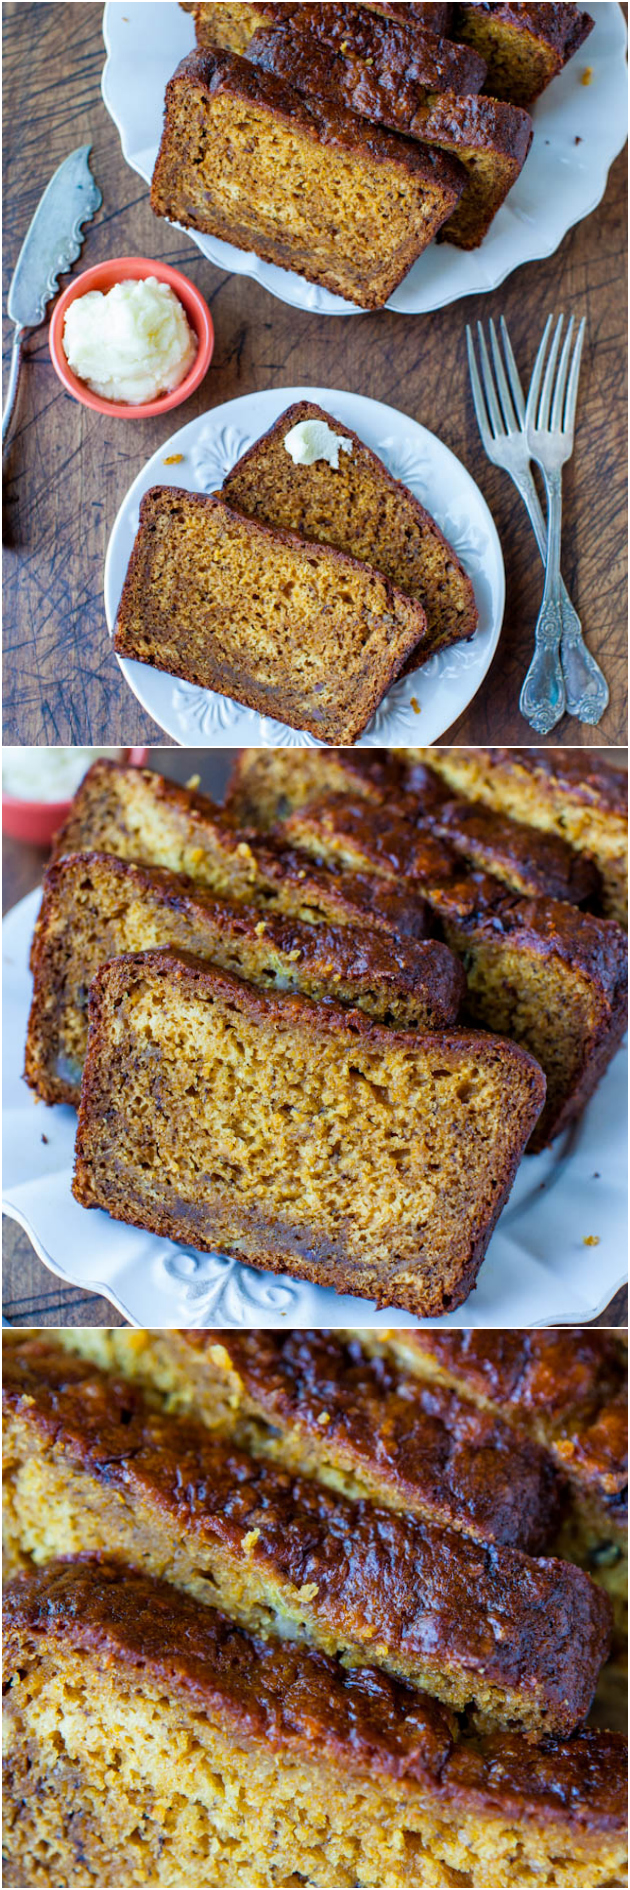 Pumpkin Banana Bread — This pumpkin banana bread is topped with a homemade browned butter frosting. It's super moist thanks to the mashed bananas, pumpkin, yogurt, and melted butter in the batter! 